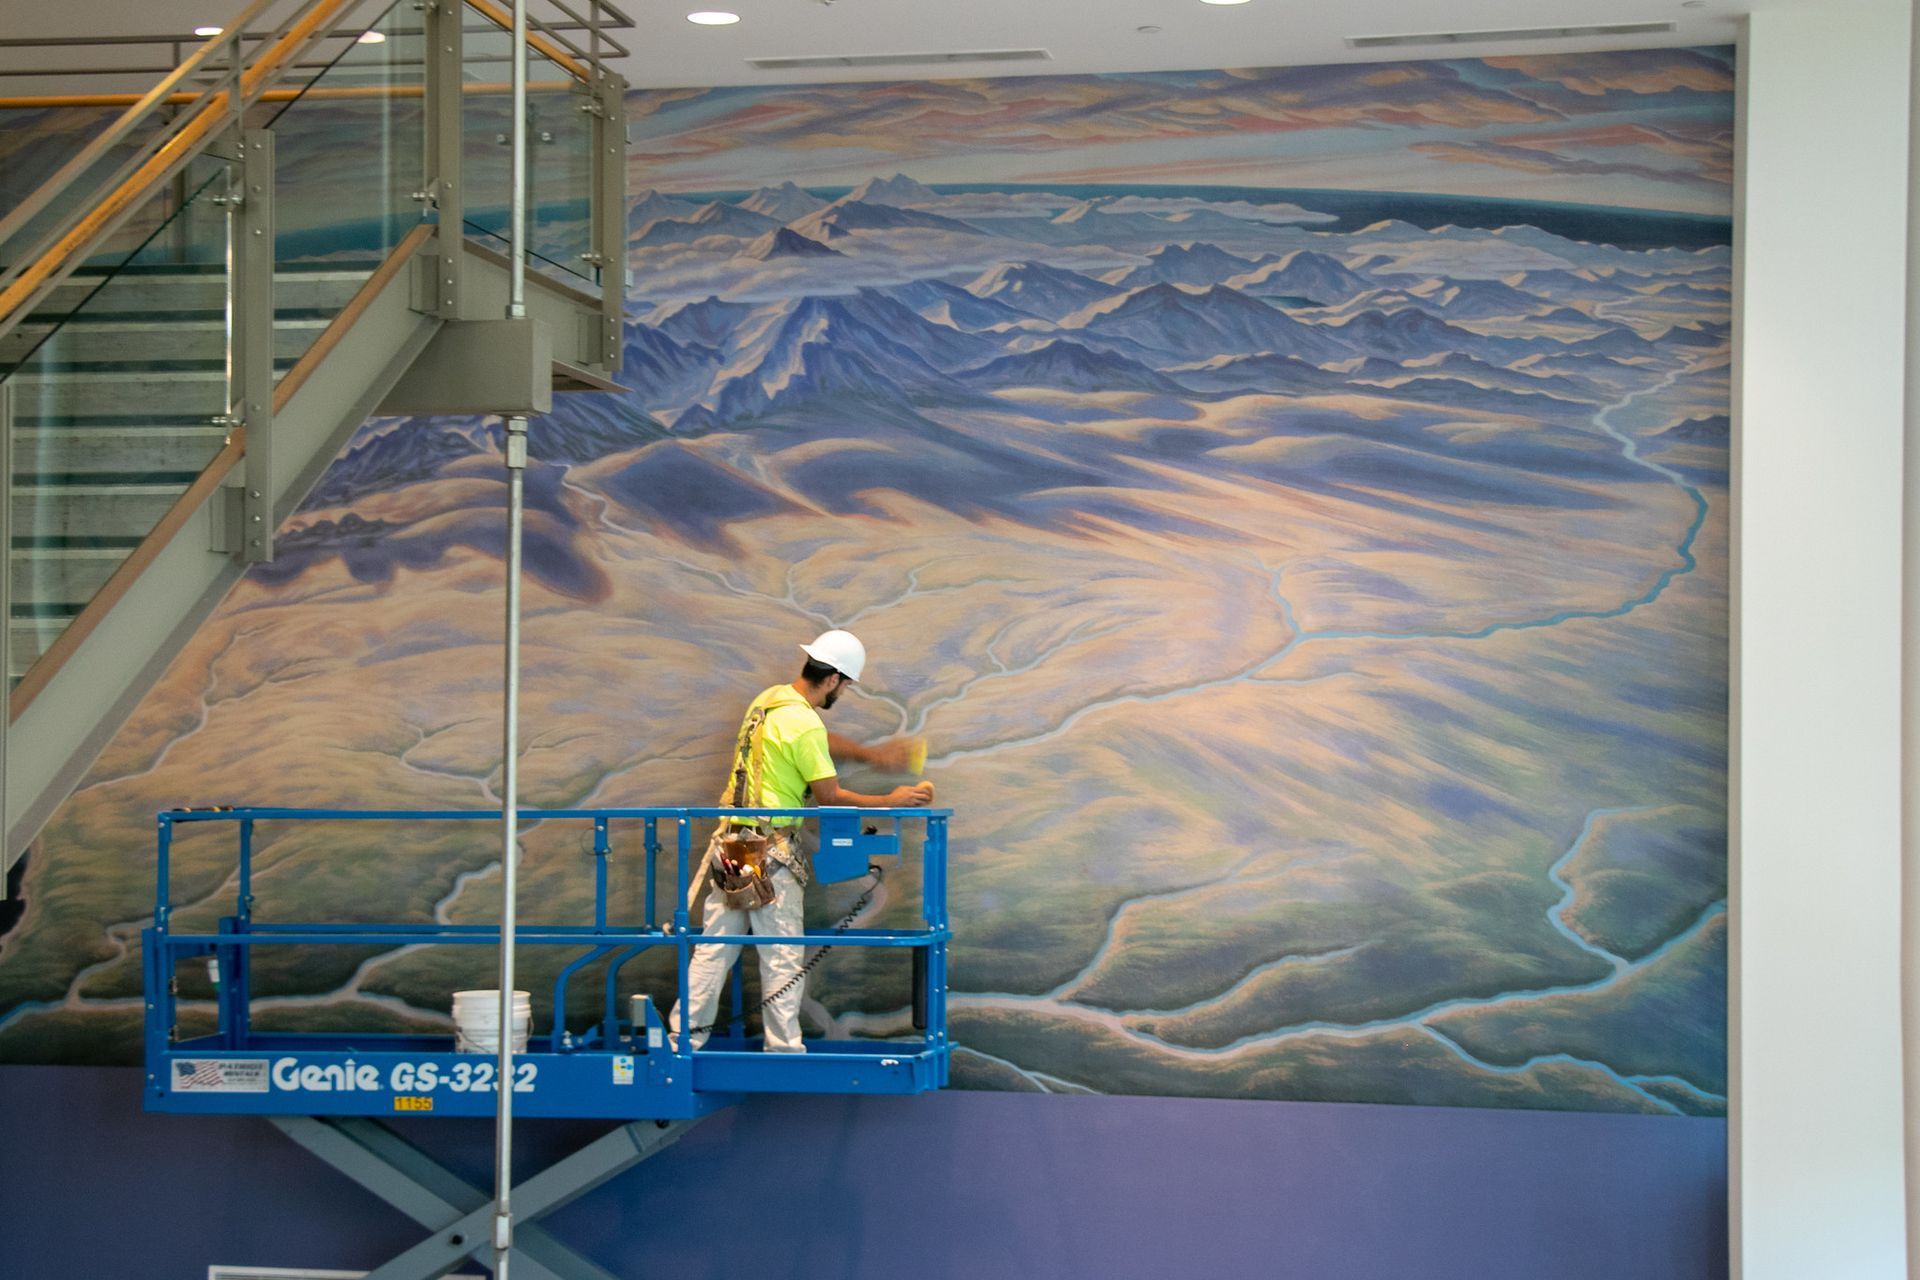 A man is standing on a lift painting a mural on a wall.